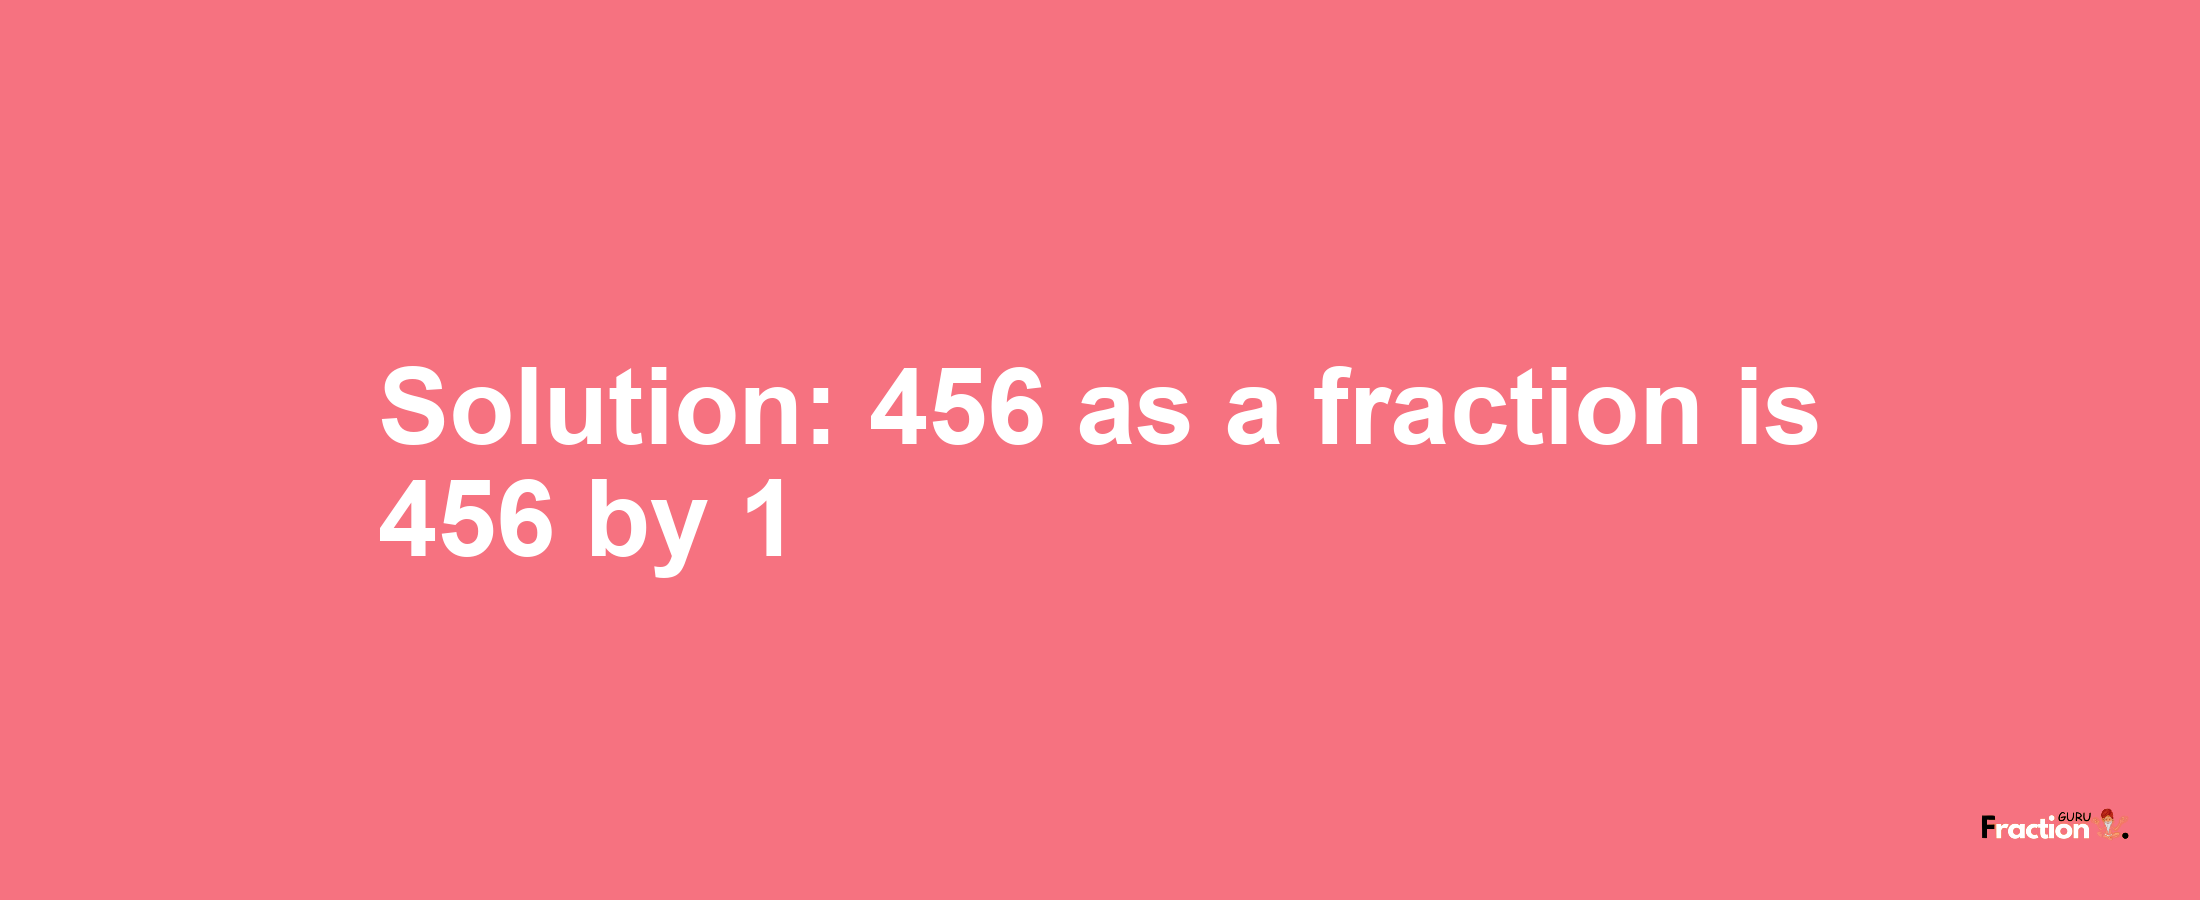 Solution:456 as a fraction is 456/1